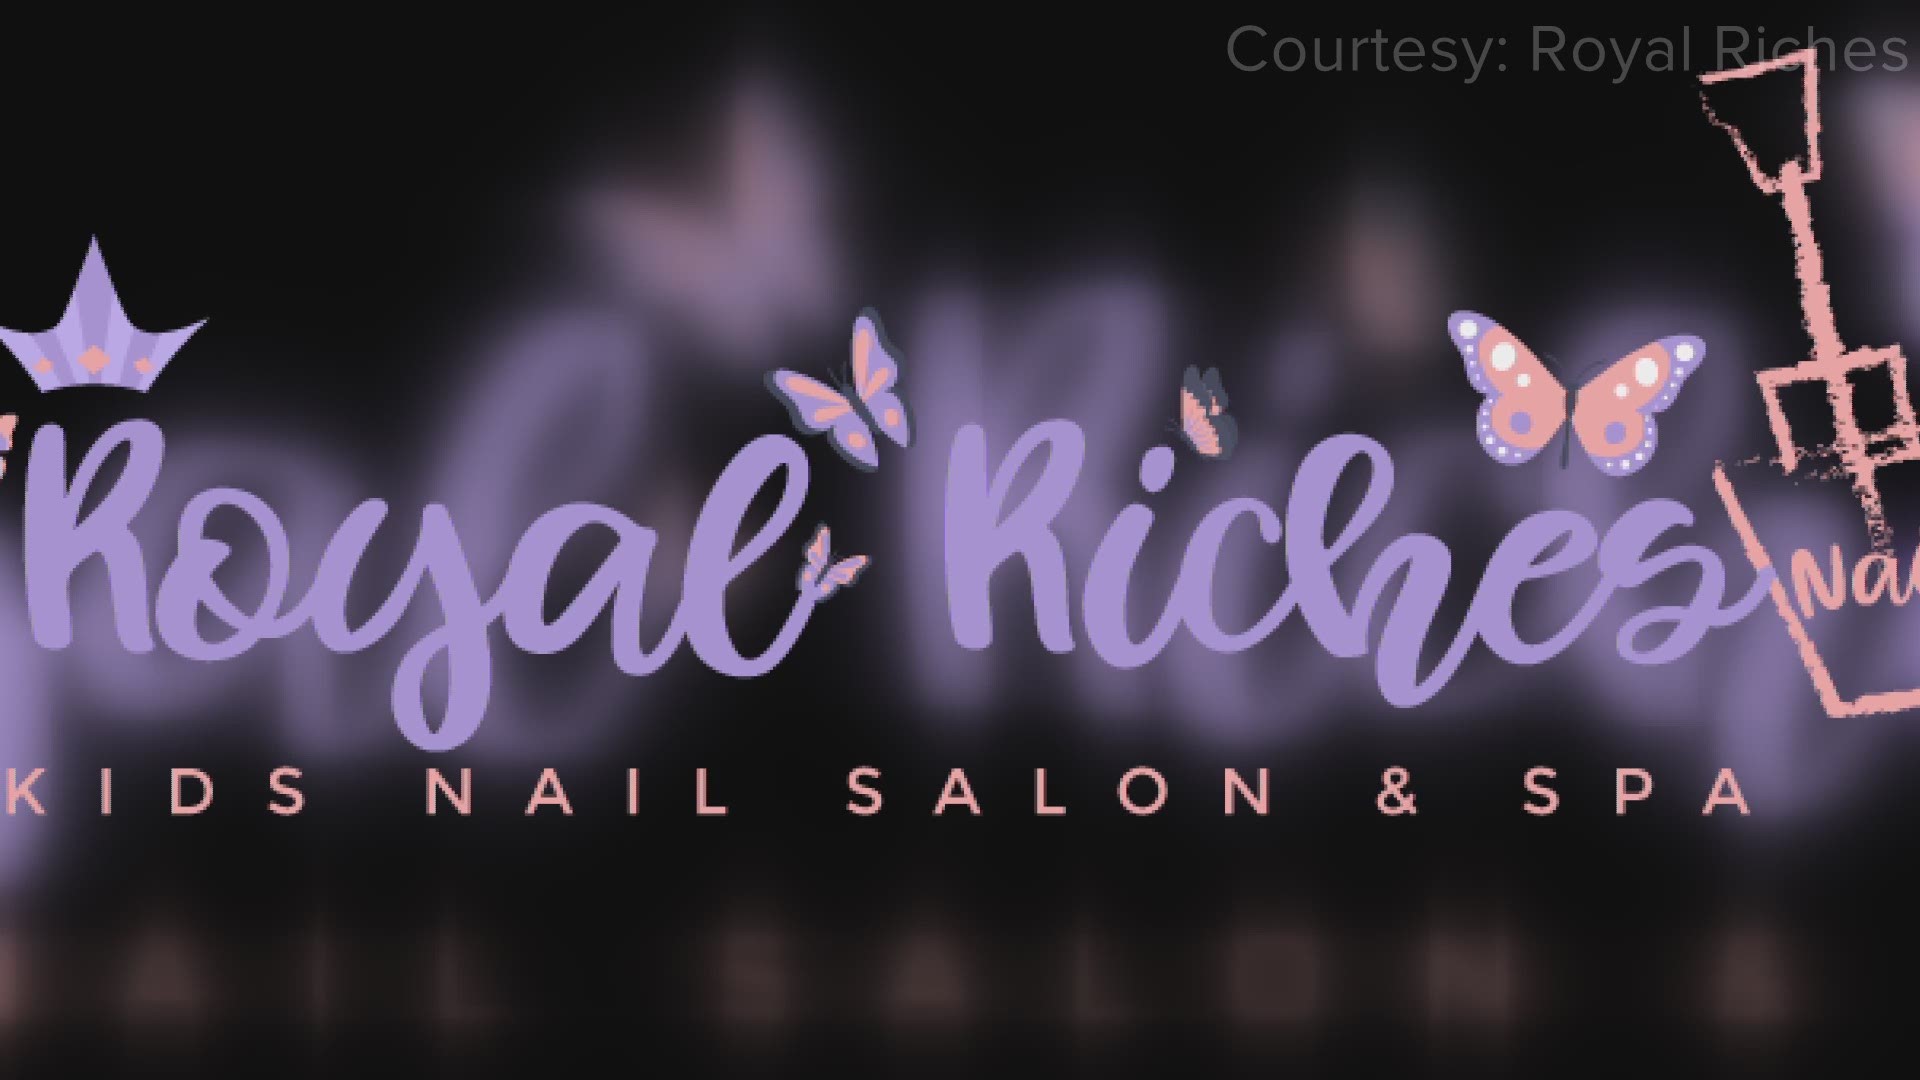 They salon offers hair and nail services for kids ages 3 to 13.